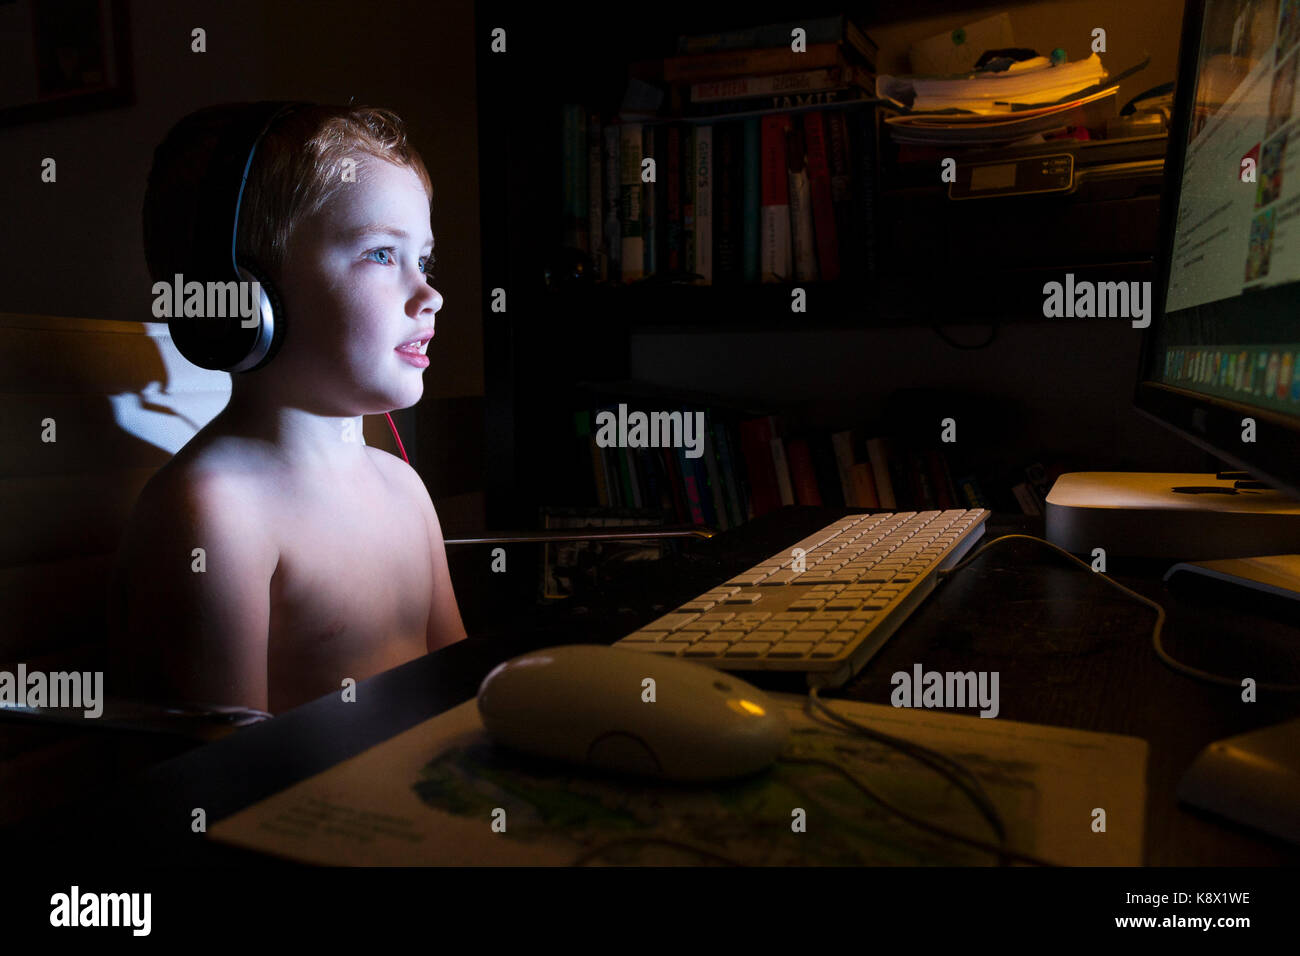 A young boy sitting at a computer watching youtube with headphones on in a dark room Stock Photo